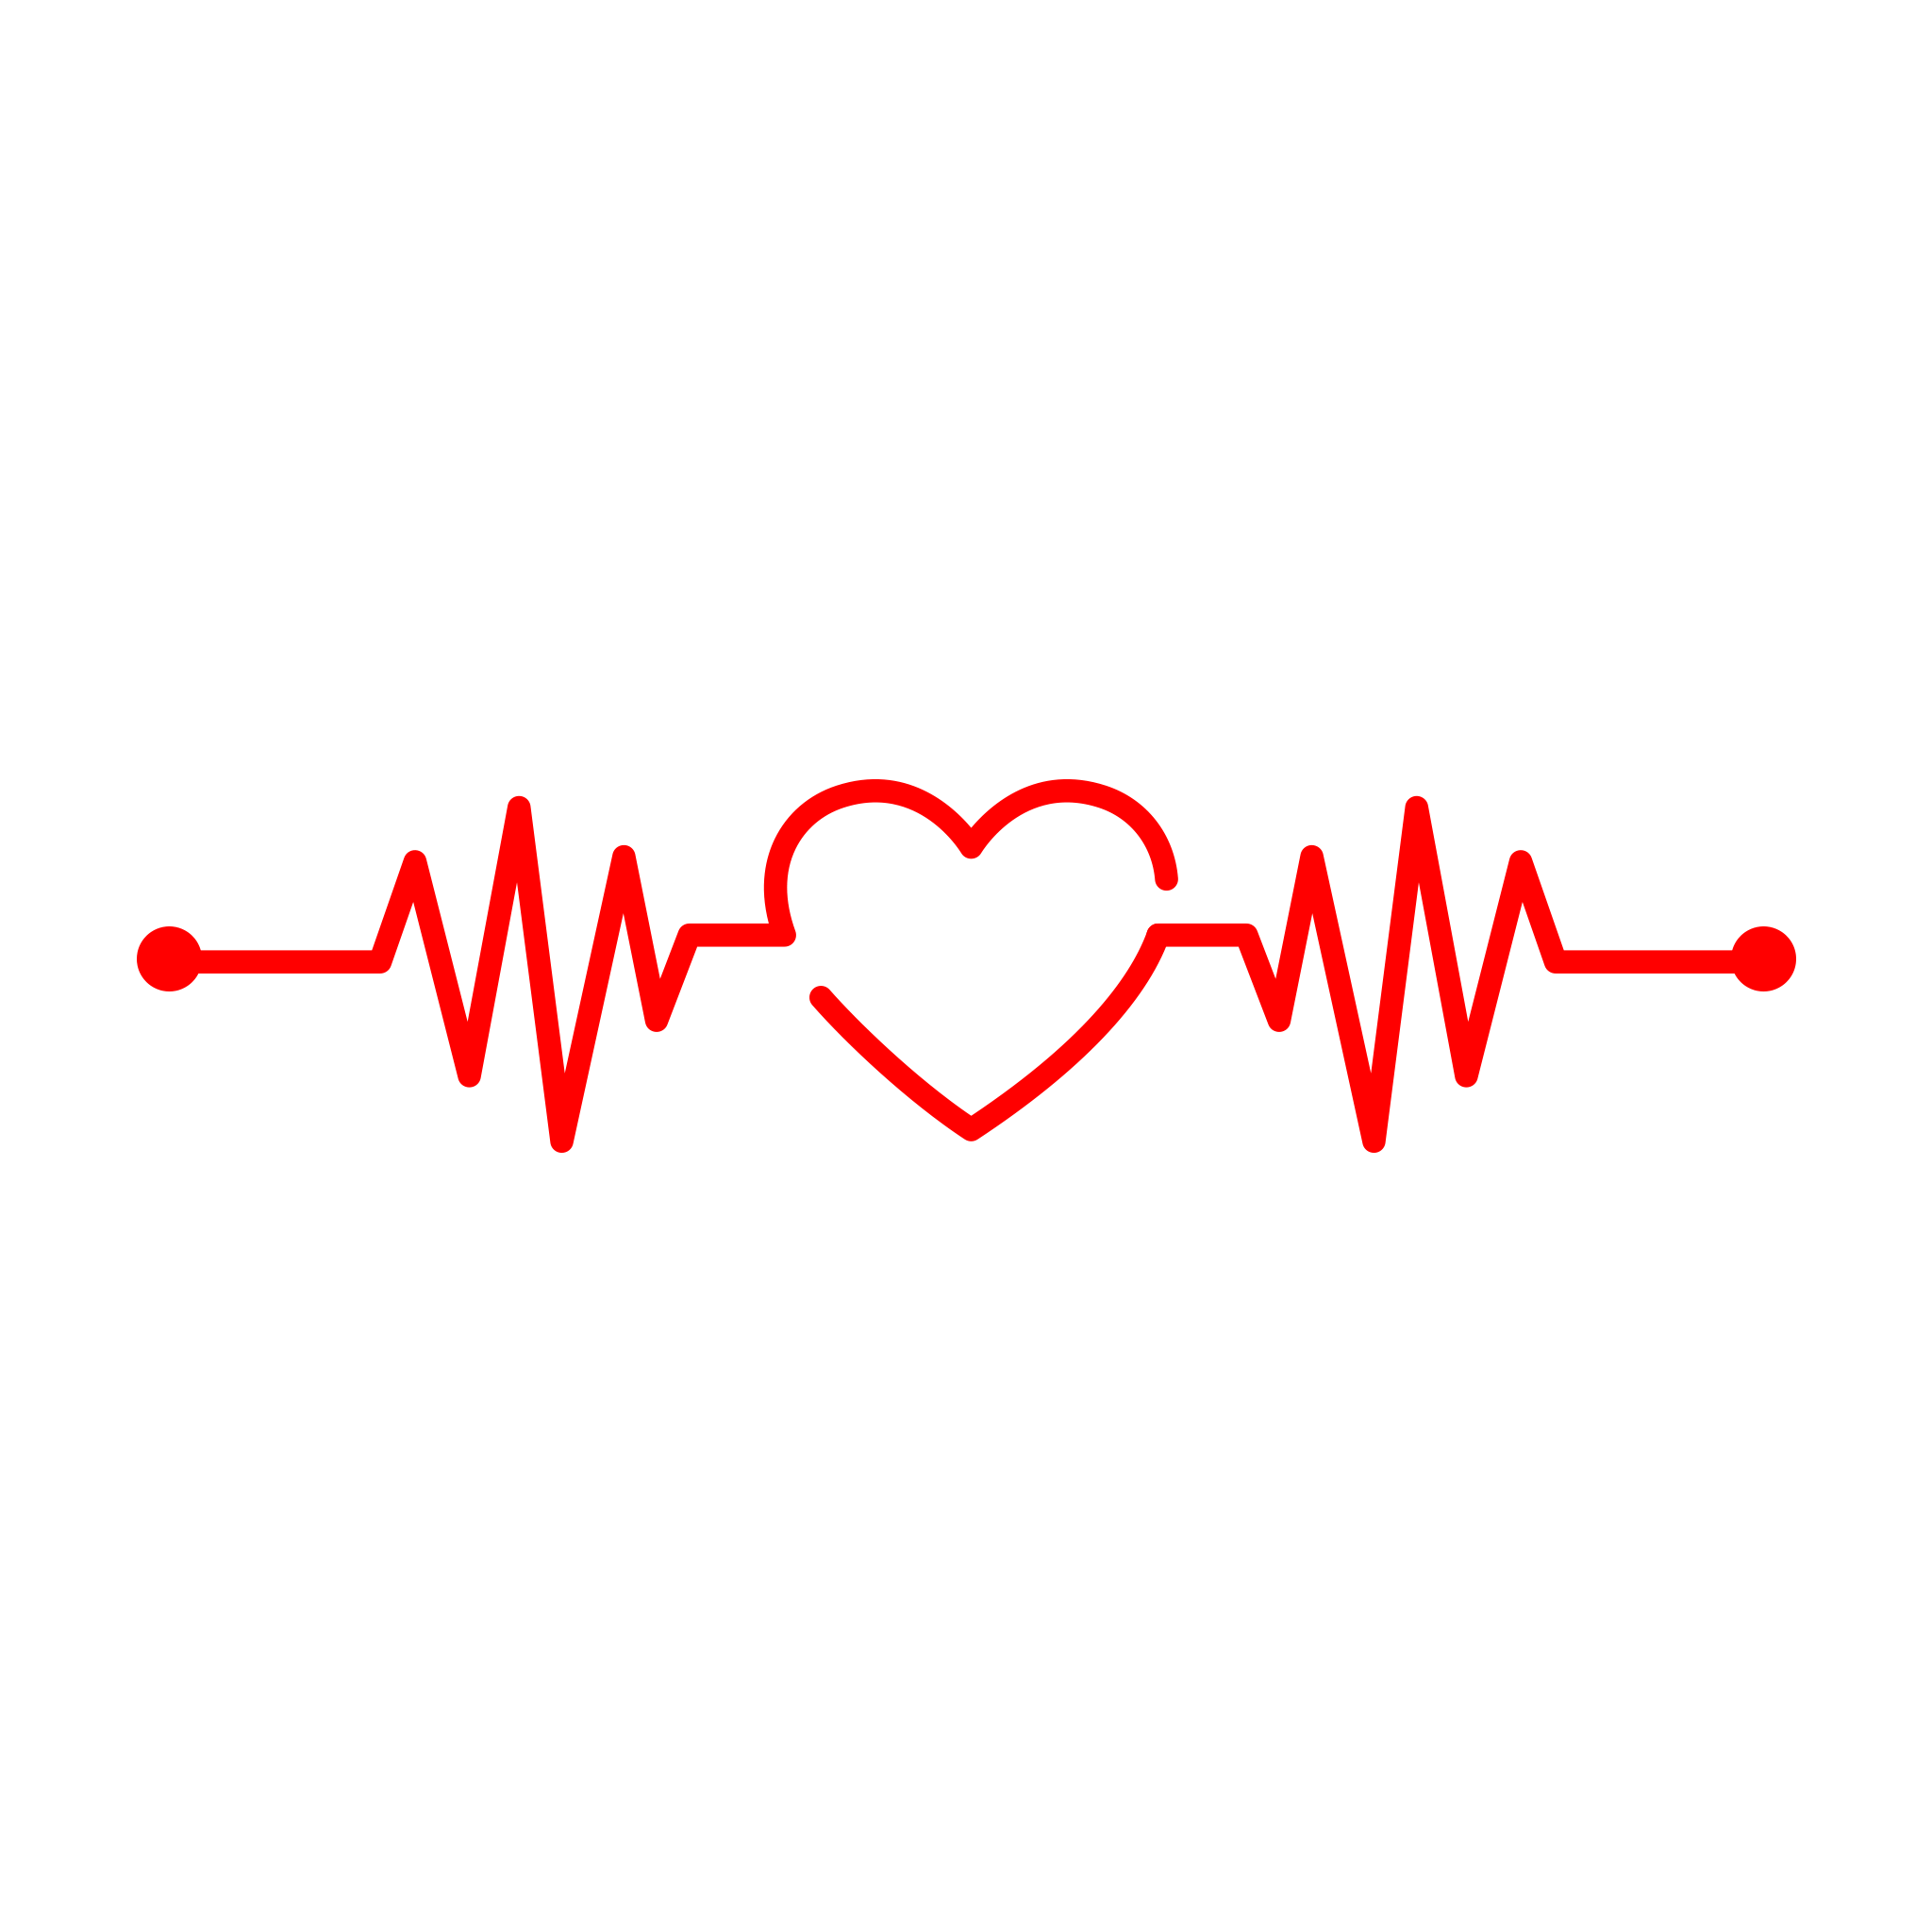 Heartbeat Graph PNG Free Download.